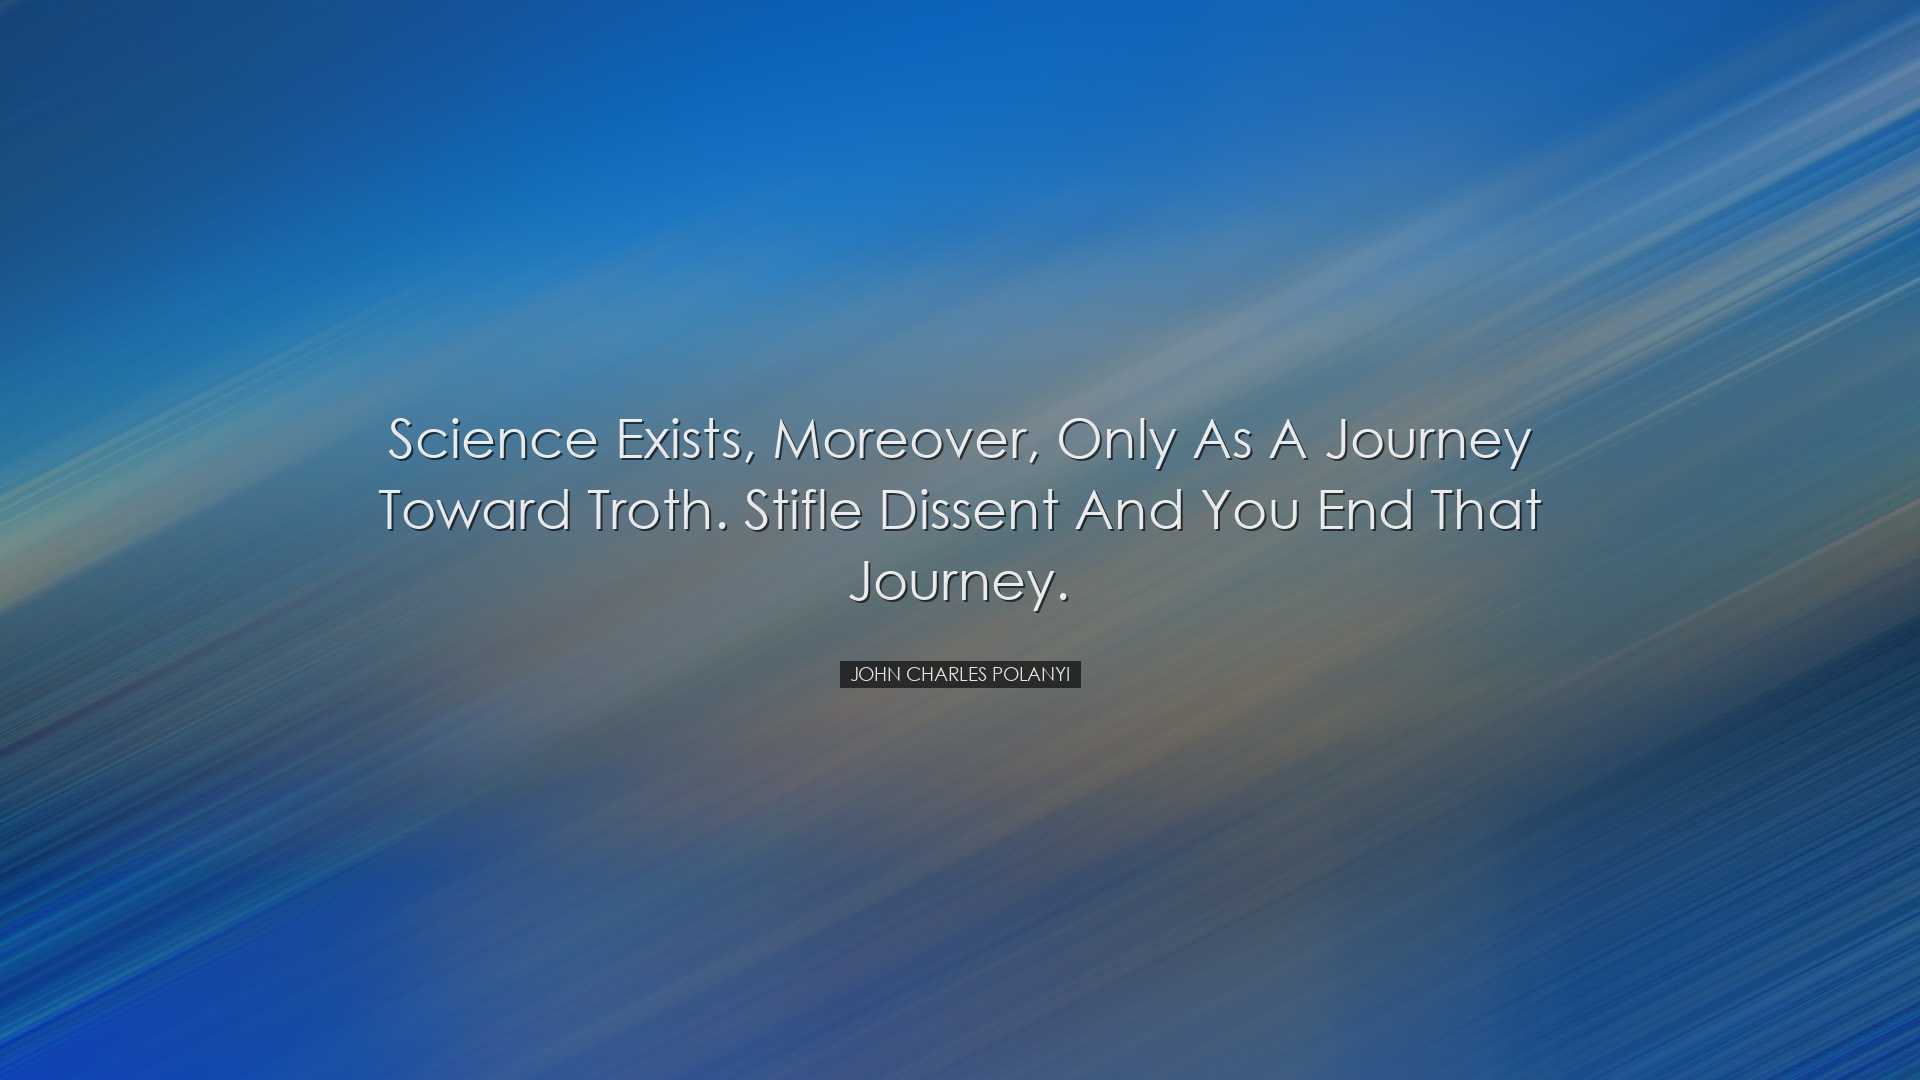 Science exists, moreover, only as a journey toward troth. Stifle d